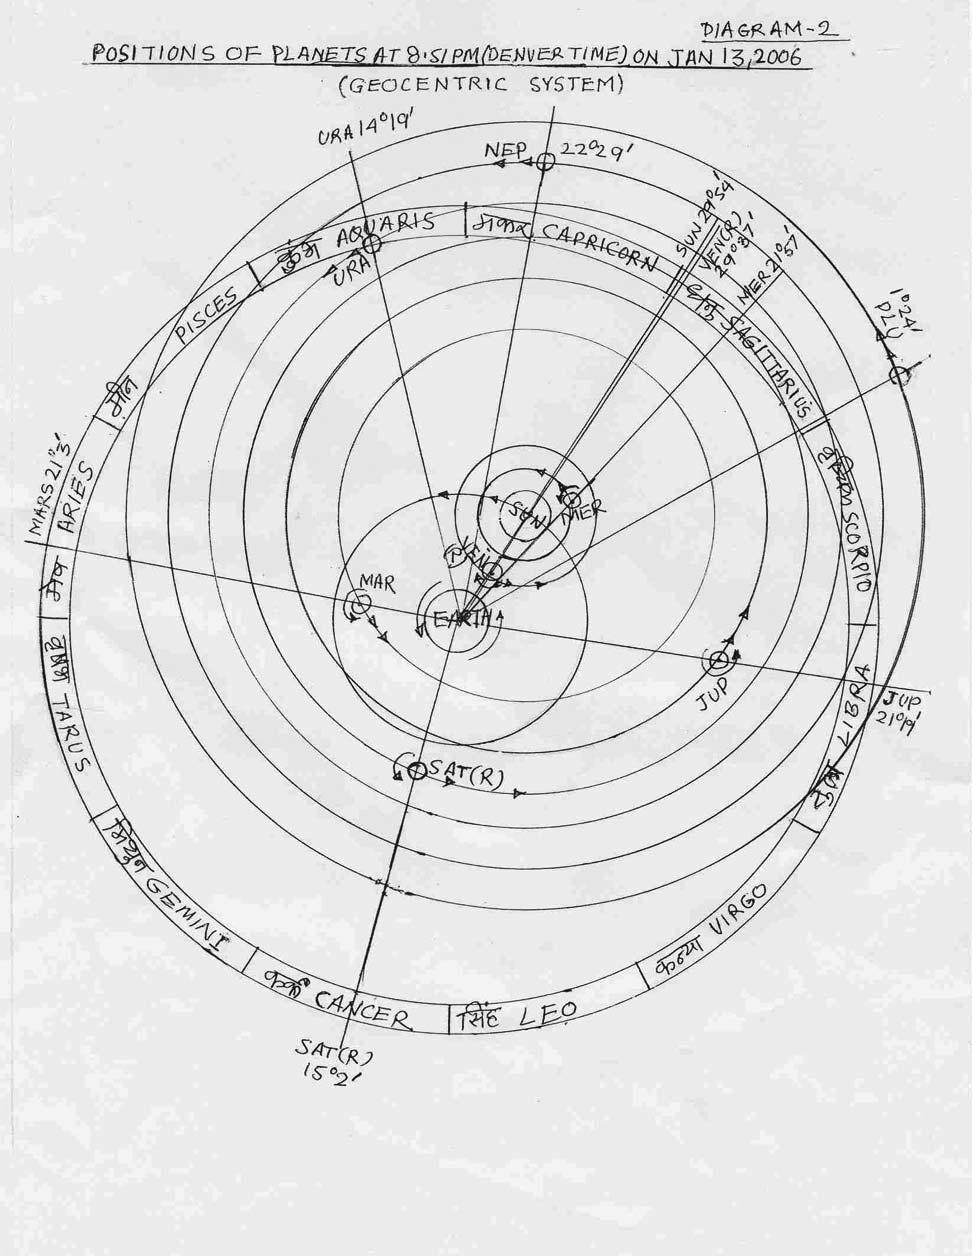 ॐ O.D. Mande Diagram-2 : Positions of Planets At 8.51 pm (Denver Time) on Jan.